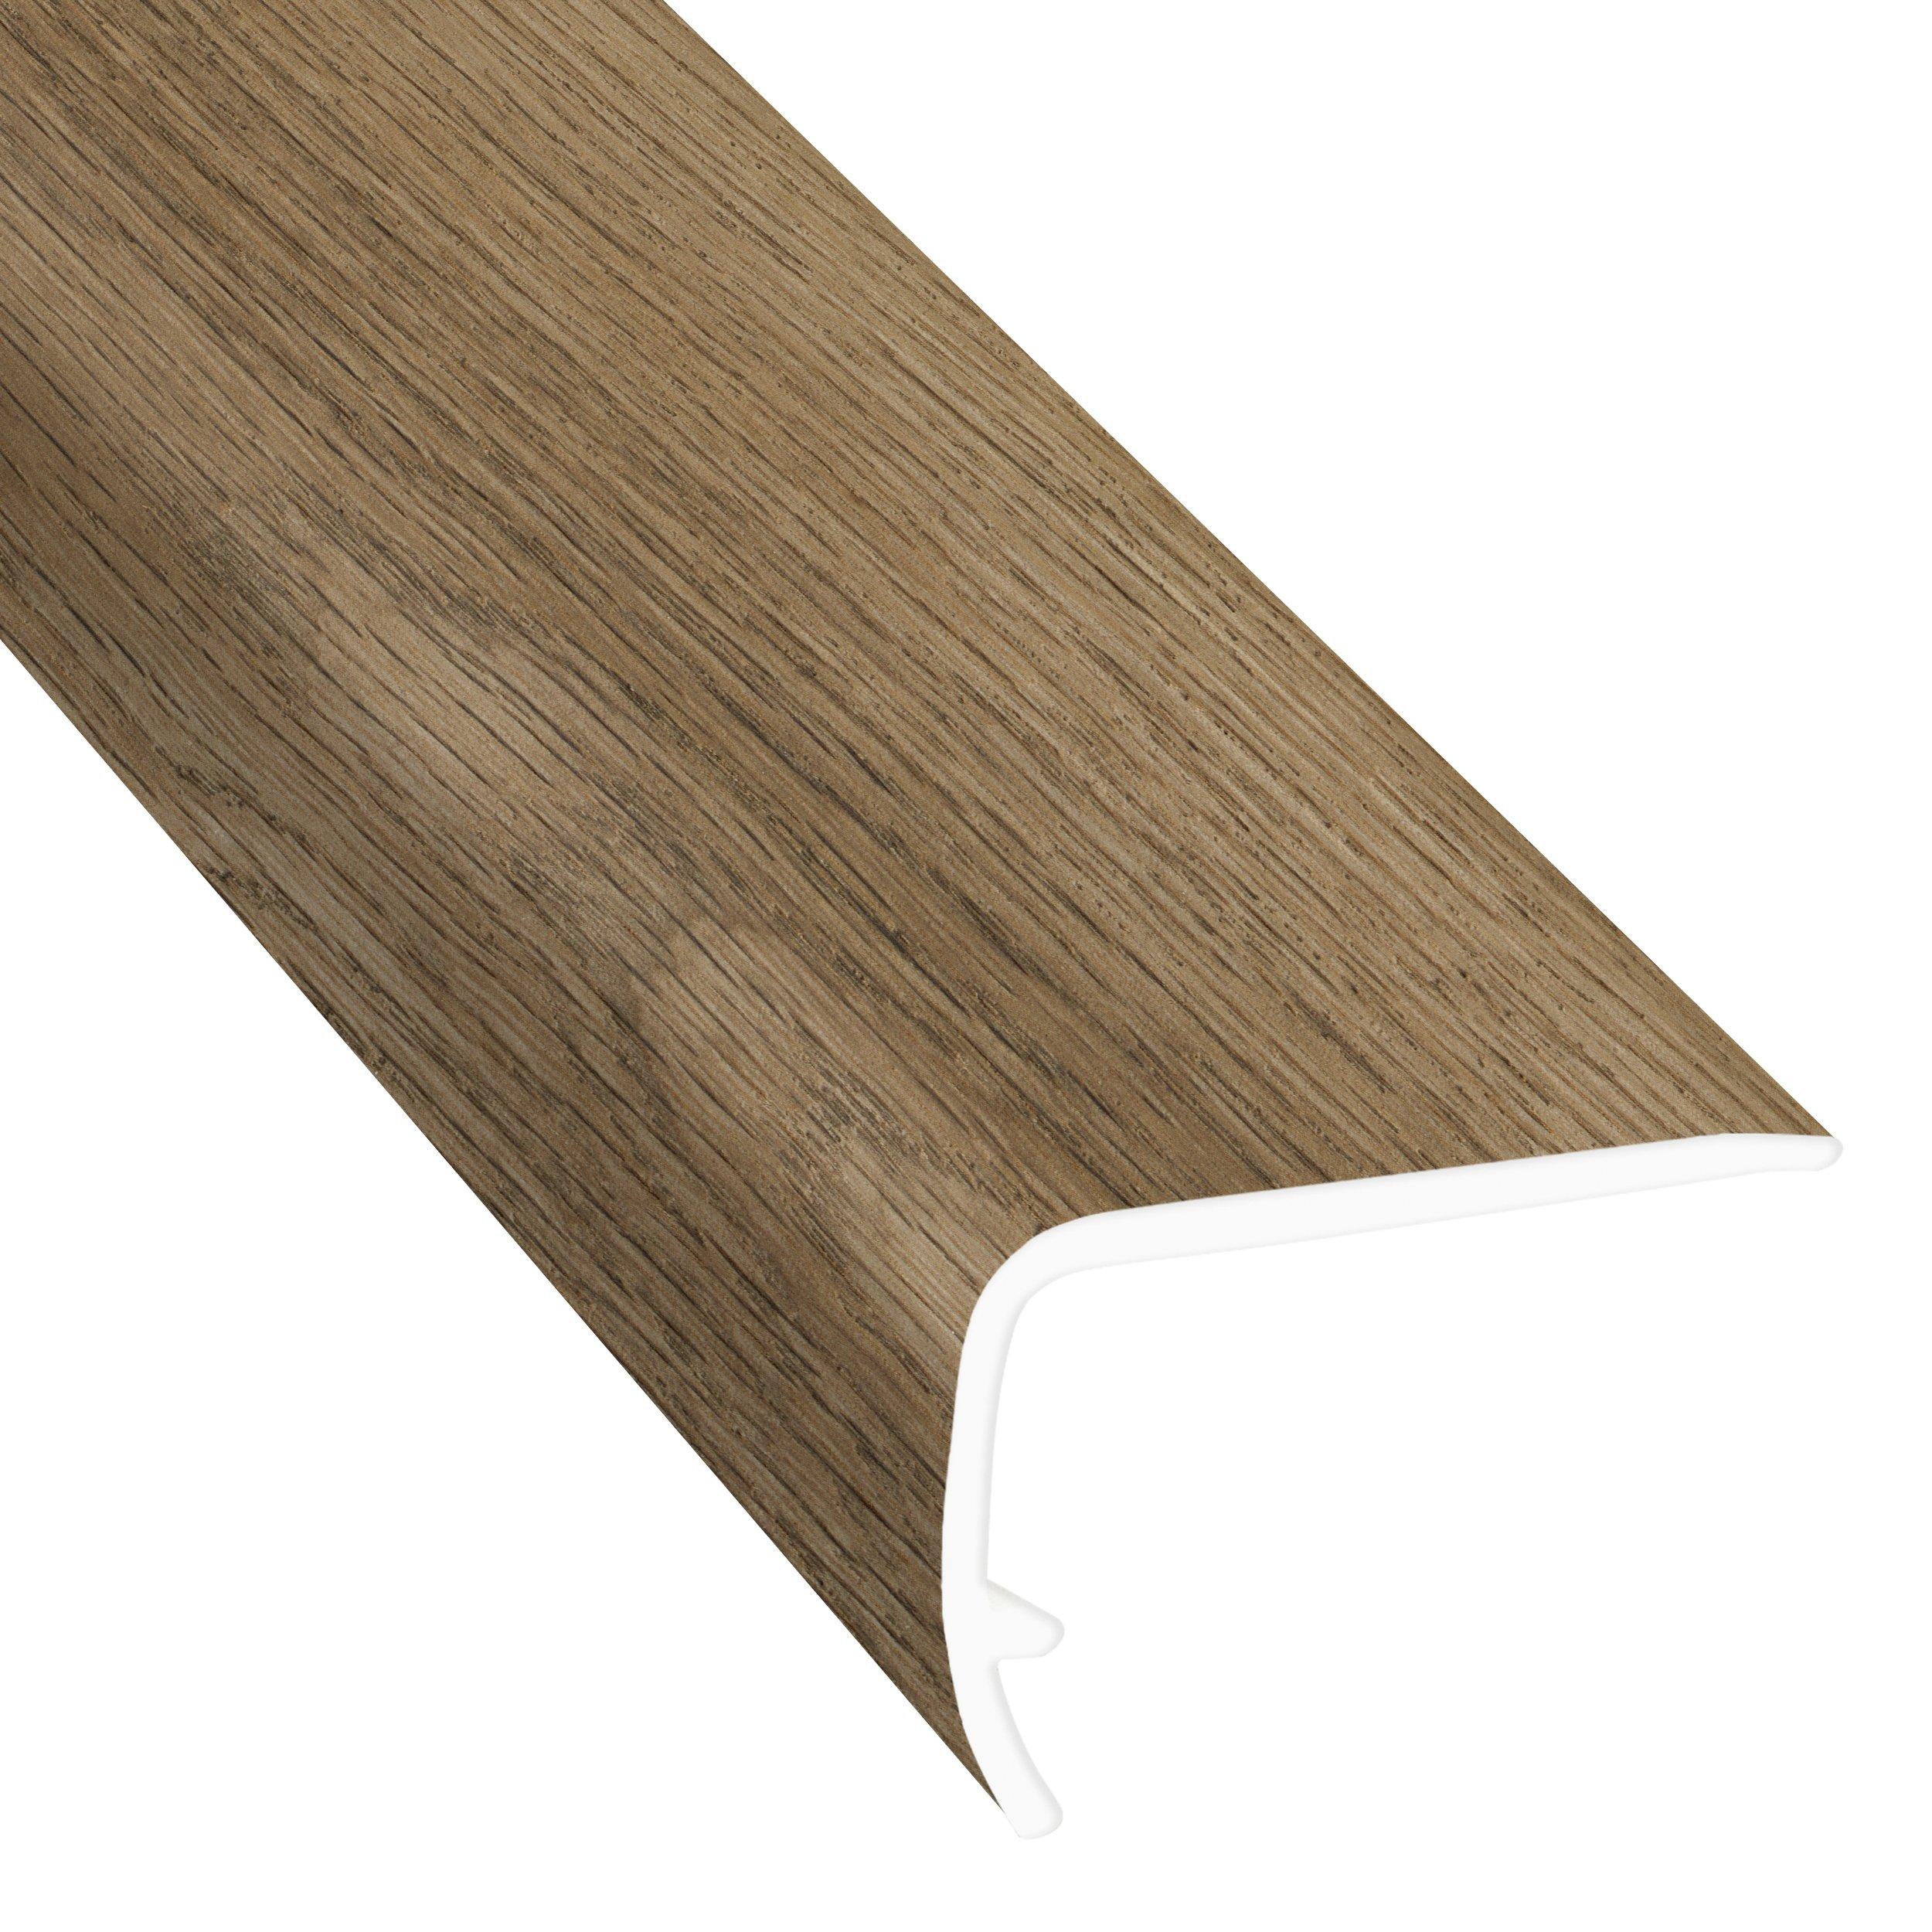 Warm Oak 20WL 94in. Vinyl Overlapping Stair Nose